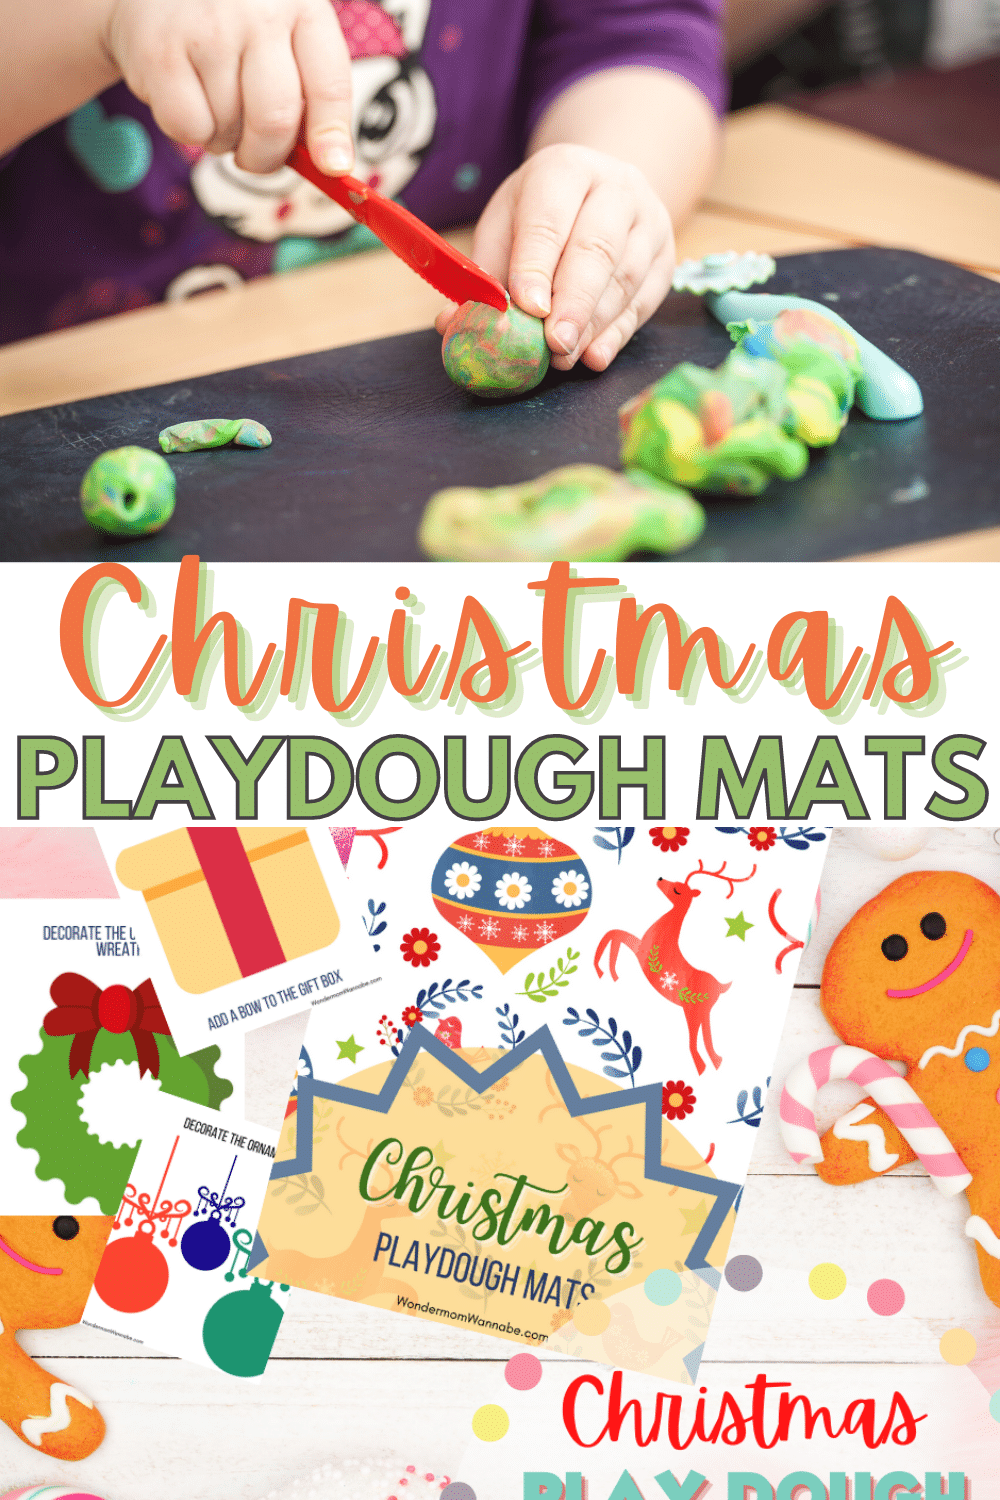 These Christmas Playdough Mats are so much fun for the kids! They're a great way to get away from the screens for creative play. #christmas #playdoughmats #forkids #freeprintable via @wondermomwannab